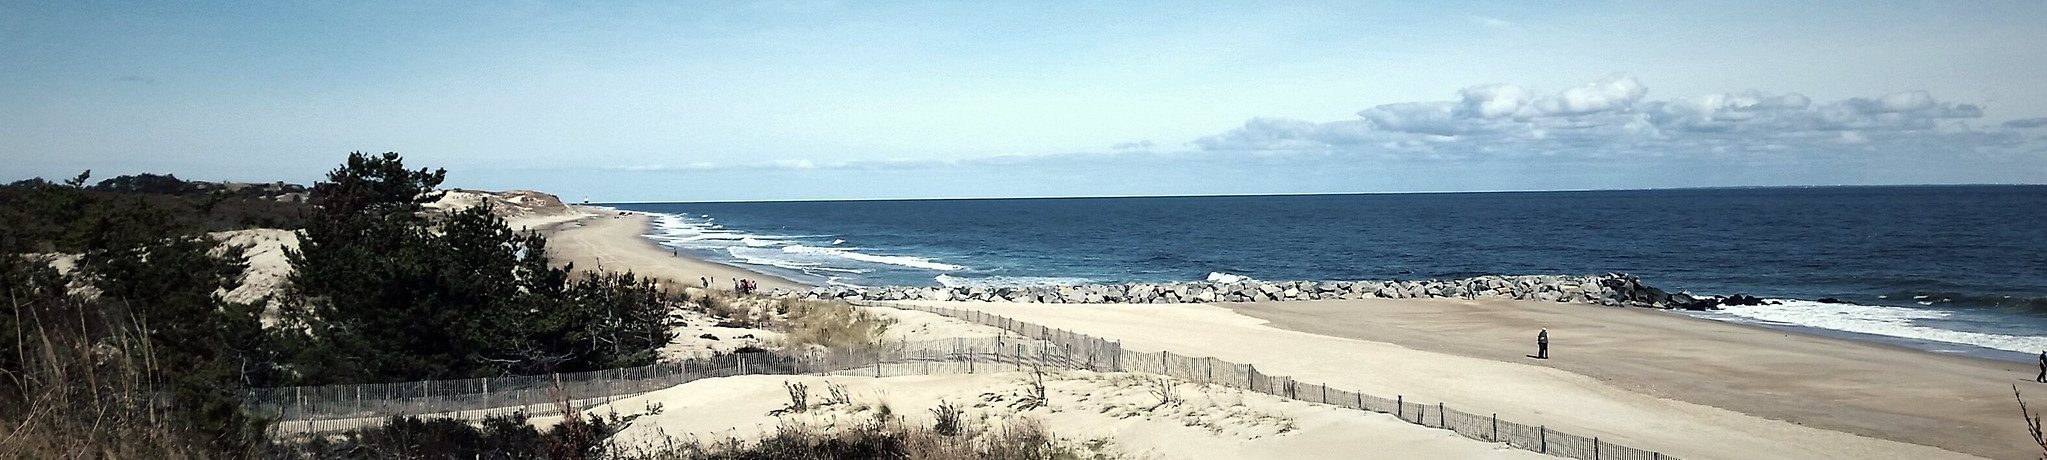 Looking north along the beach at Cape Henlopen State Park.